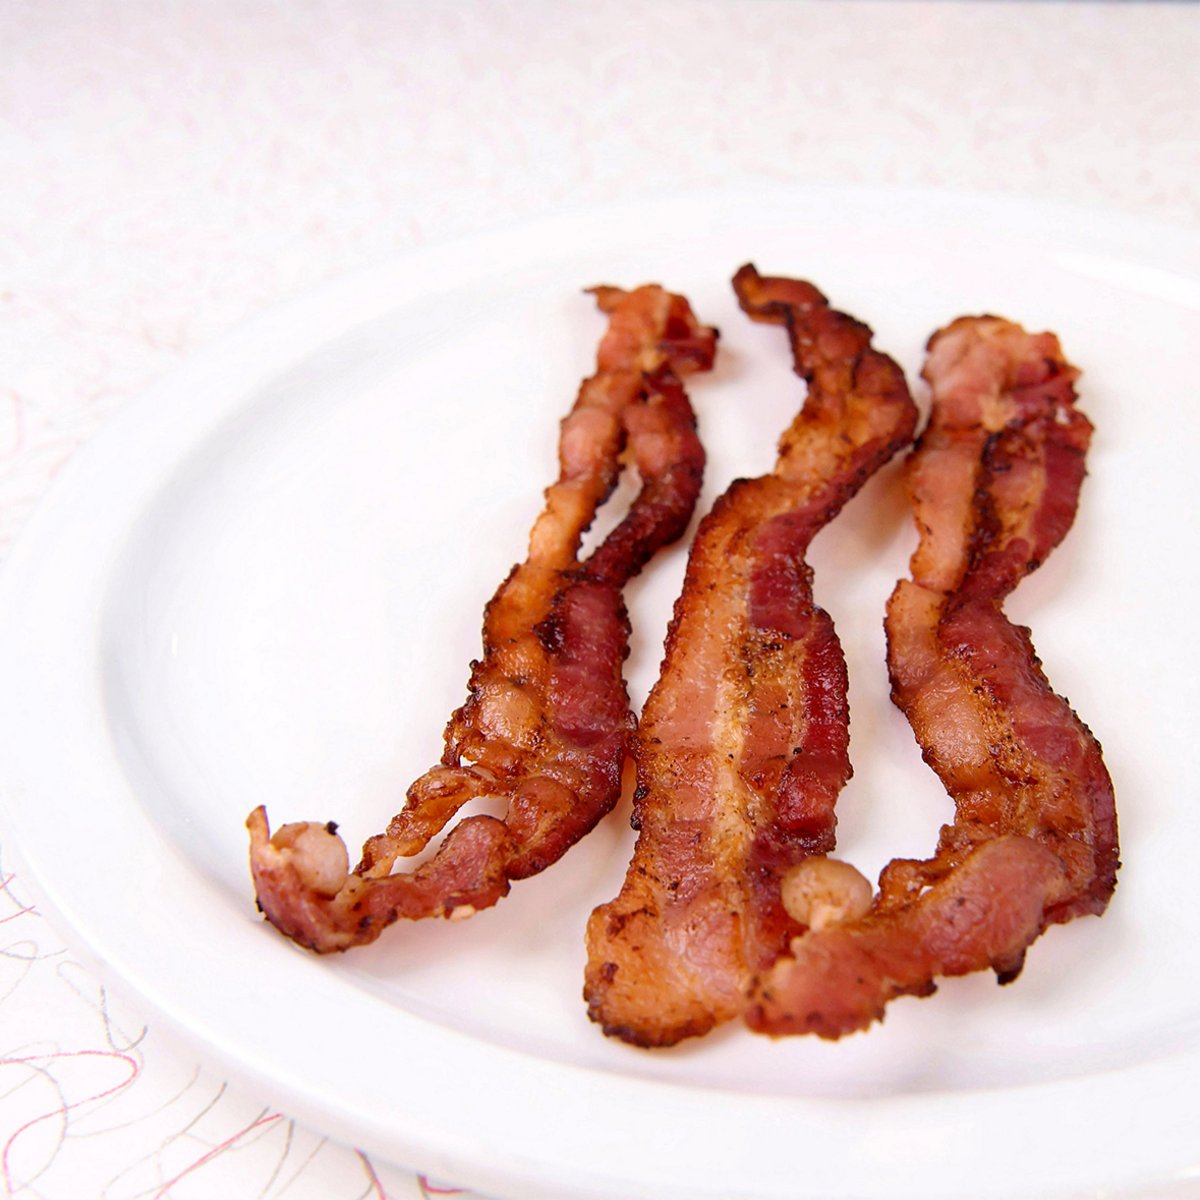 #Bacon makes everything a little better. Don't you agree? Come by Penny's Diner Belen and add a side of bacon. We won't tell 🤫🤐 #PennysDiner #instayum